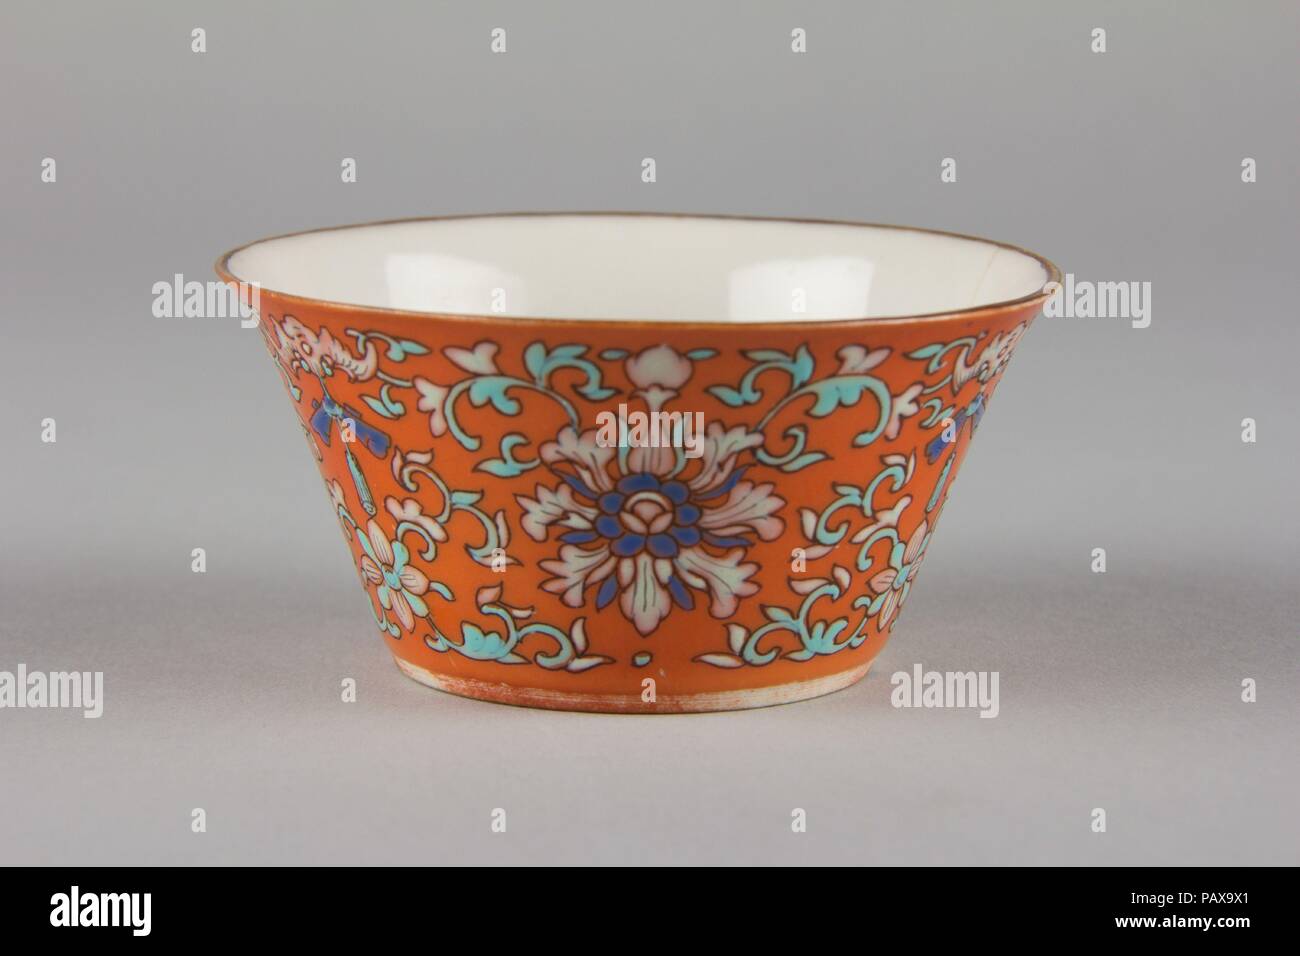 https://c8.alamy.com/comp/PAX9X1/cup-from-a-set-of-eight-culture-china-dimensions-h-1-34-in-44-cm-w-3-12-in-89-cm-date-late-18th-first-half-of-the-19th-century-museum-metropolitan-museum-of-art-new-york-usa-PAX9X1.jpg